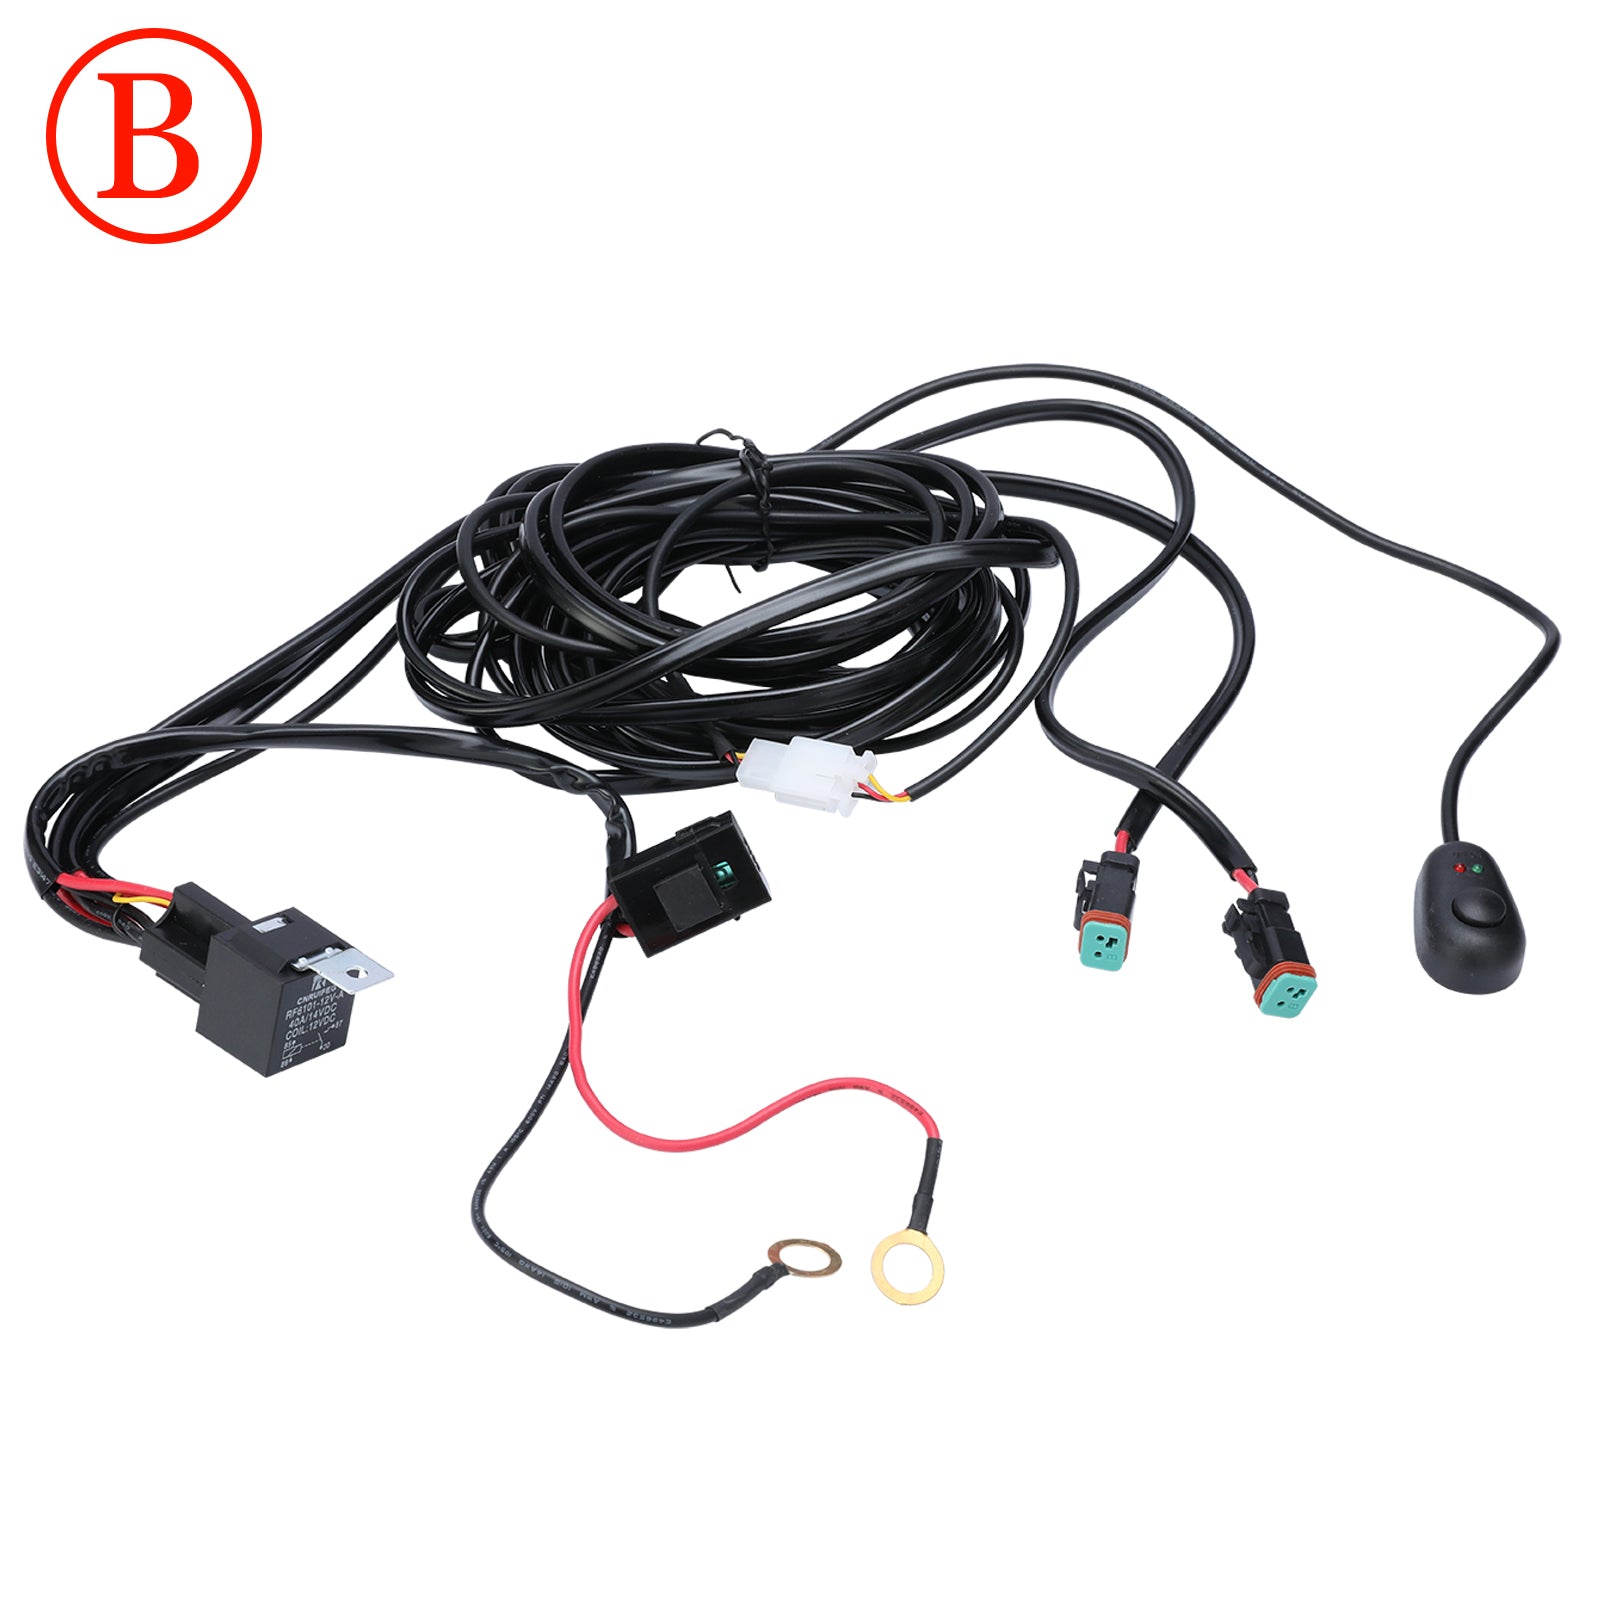 LED light Wire Group for head lights and fog lights Light Bar OPENROAD   